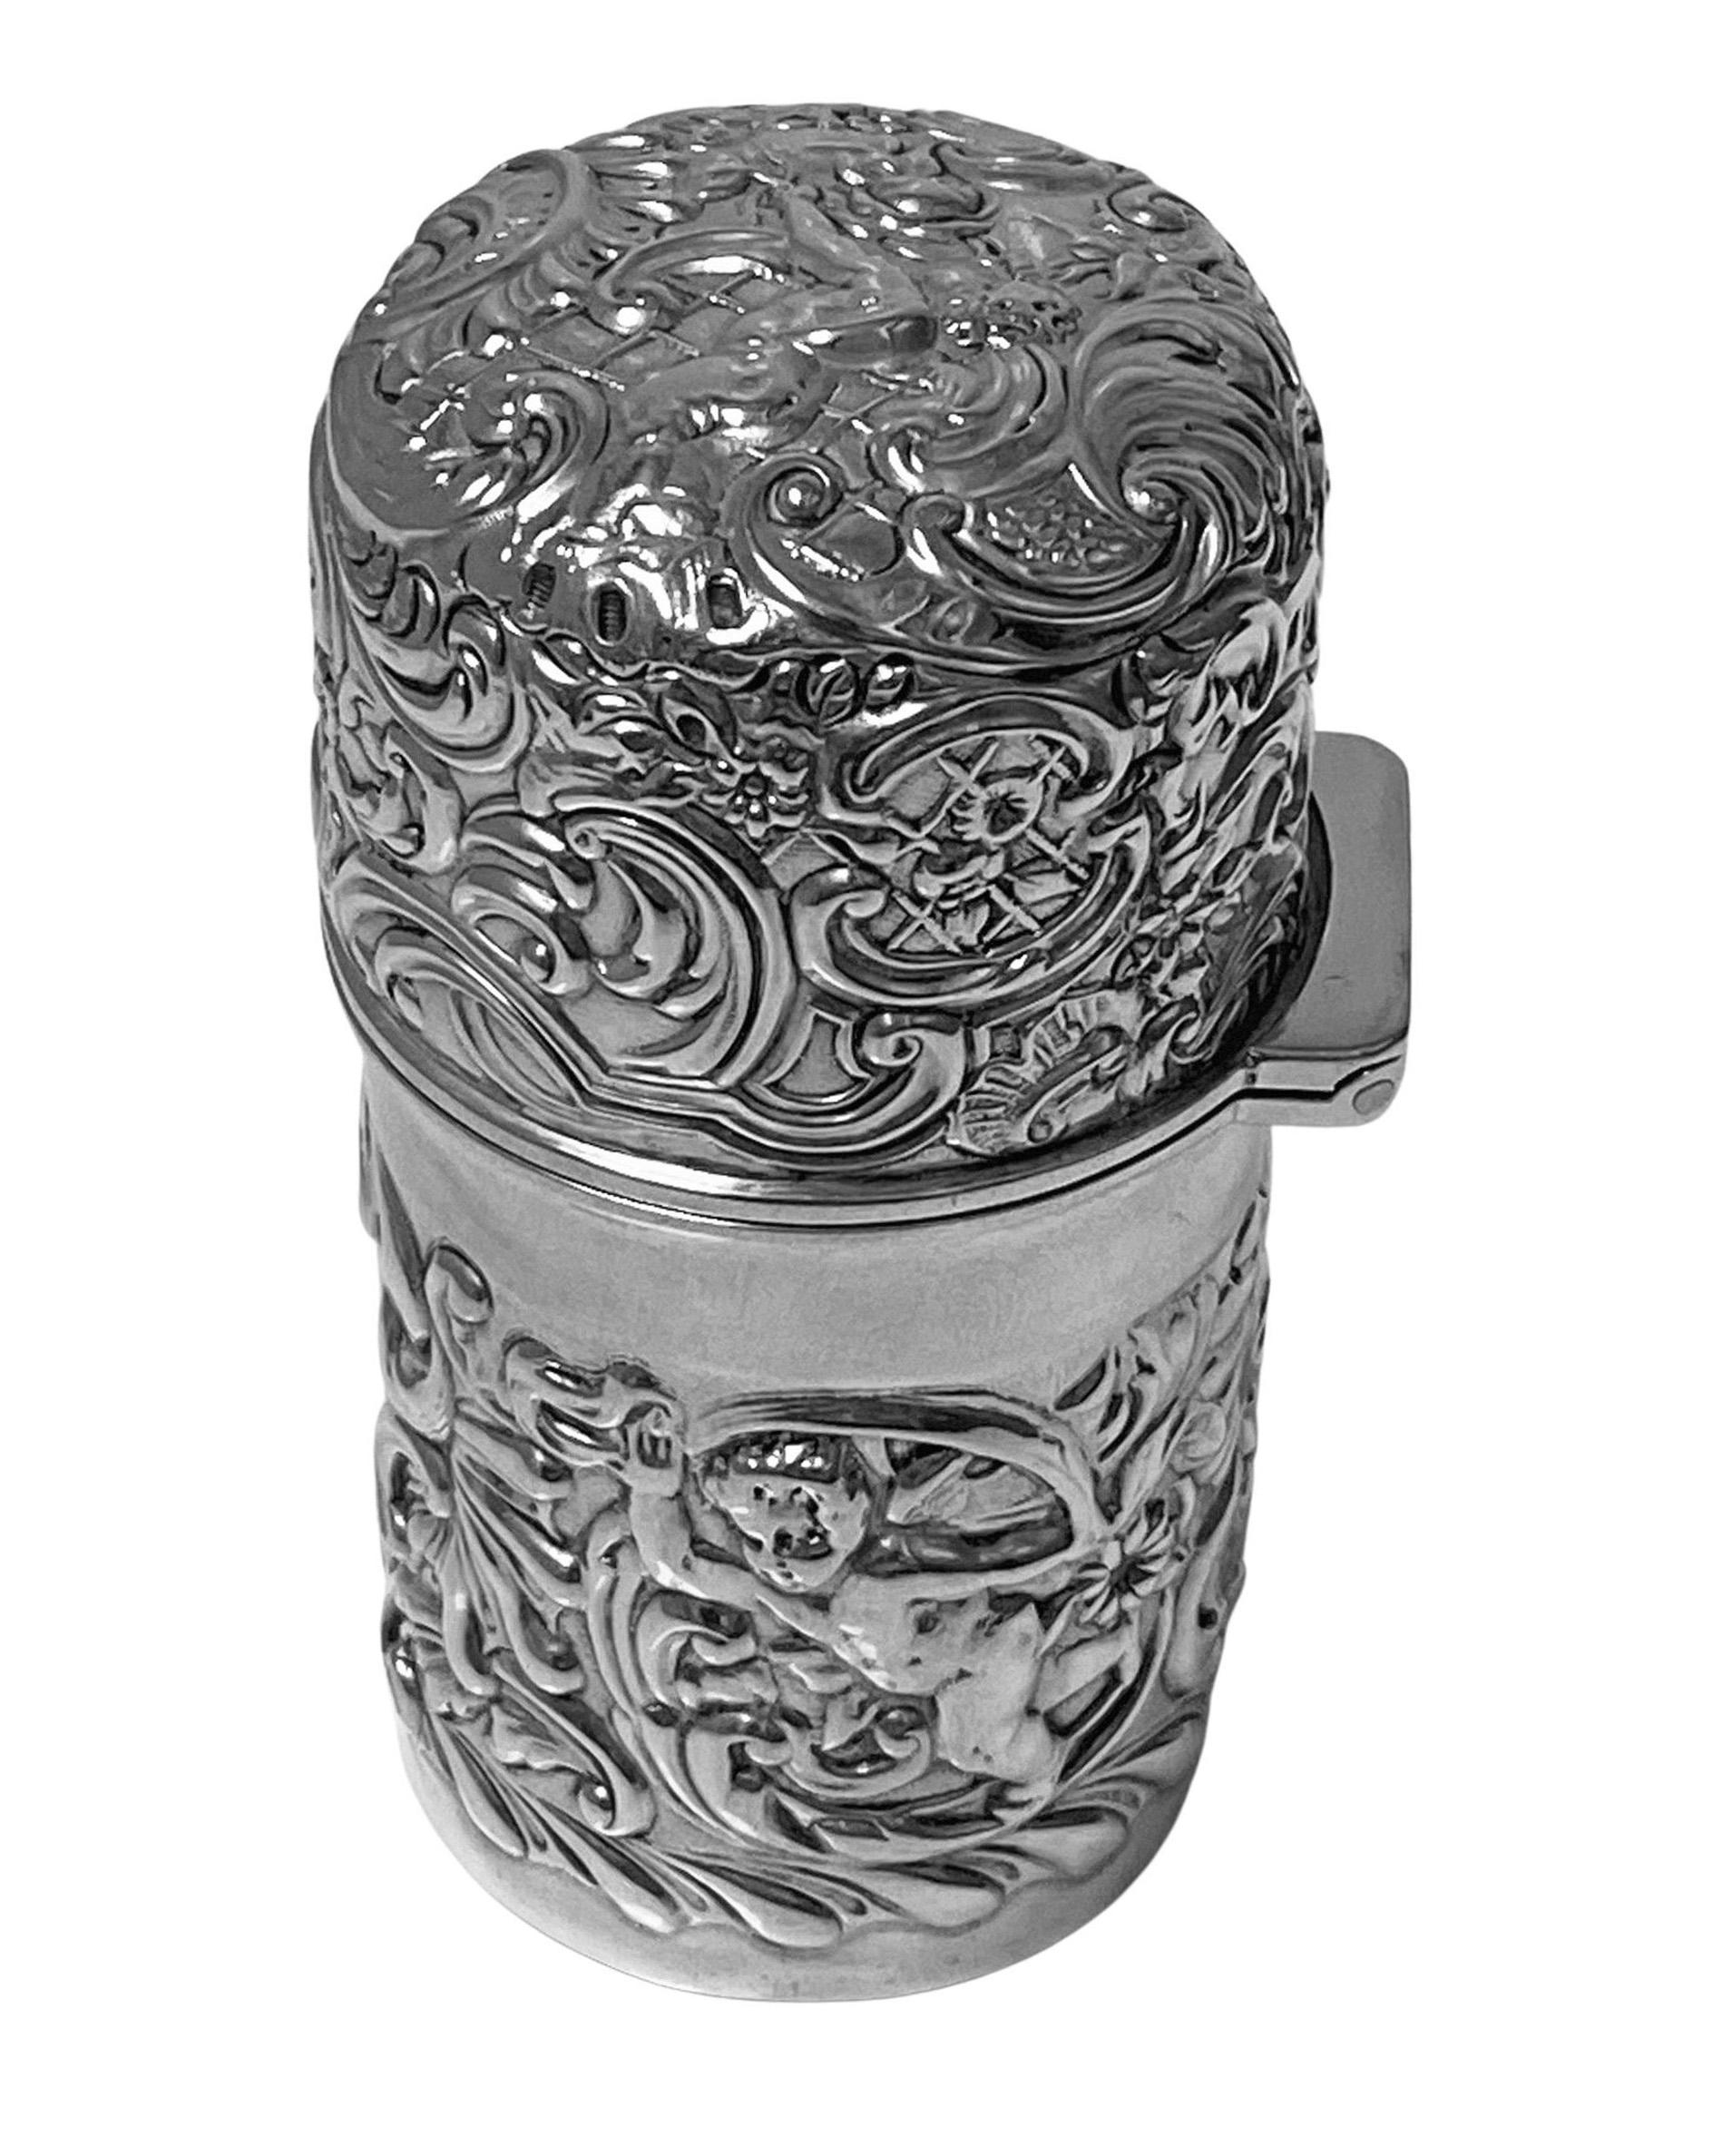 Sterling Silver Antique Silver Scent Bottle with Removeable Glass Interior, London 1895 William